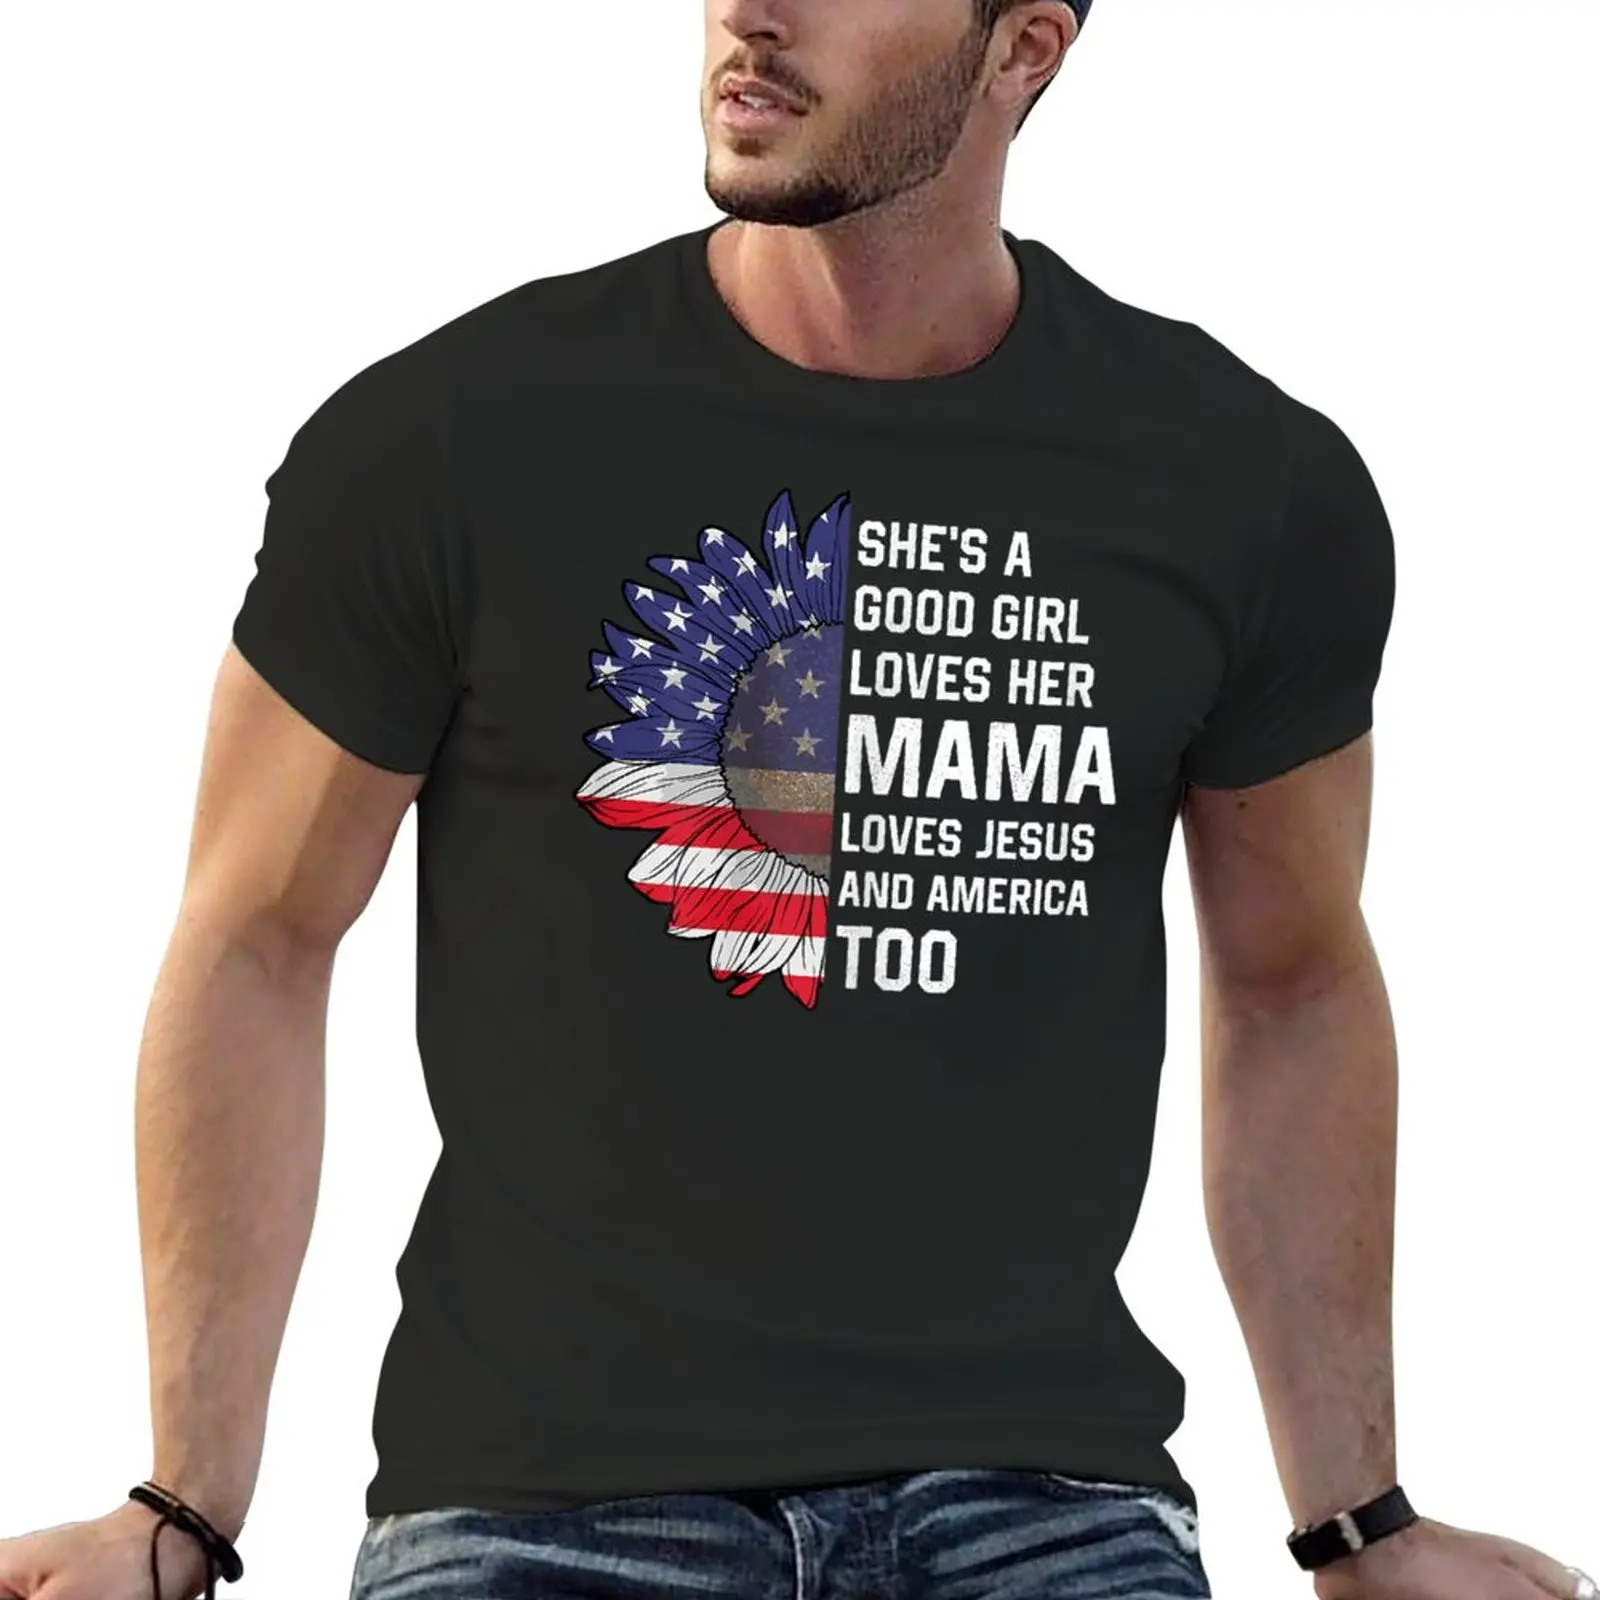 

She's A Good Girl Loves Her Mama Jesus And America Too T-Shirt T-shirt for a boy T-shirts for men cotton